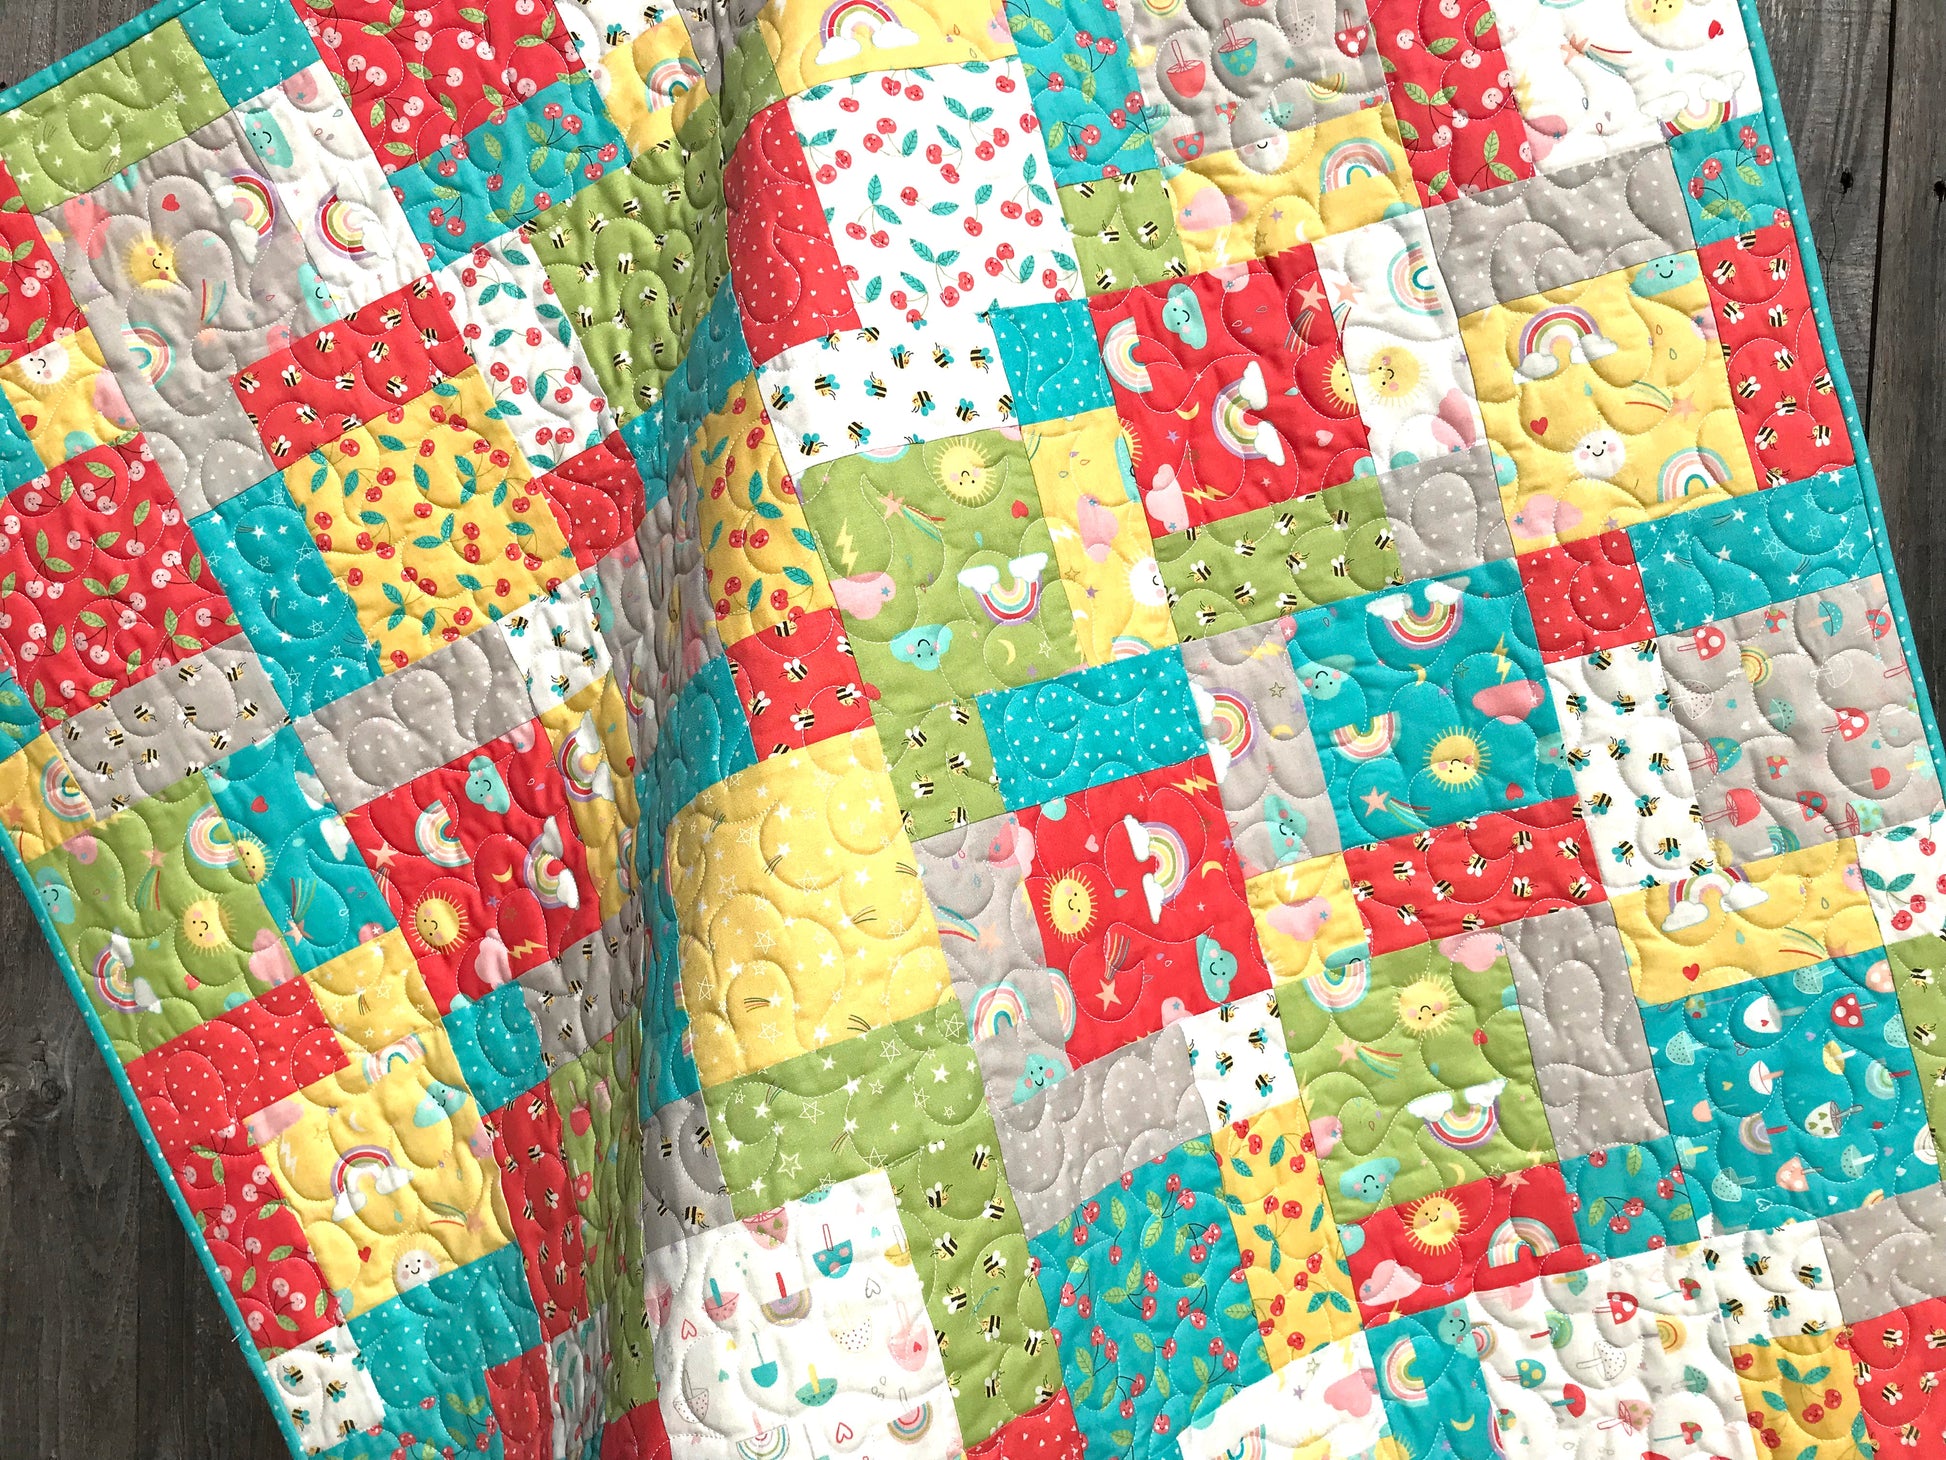 Charming Baby Quilt Pattern for Charm Squares - Digital Quilt Pattern - Handmade Quilts, Digital Patterns, and Home Décor items online - Cuddle Cat Quiltworks